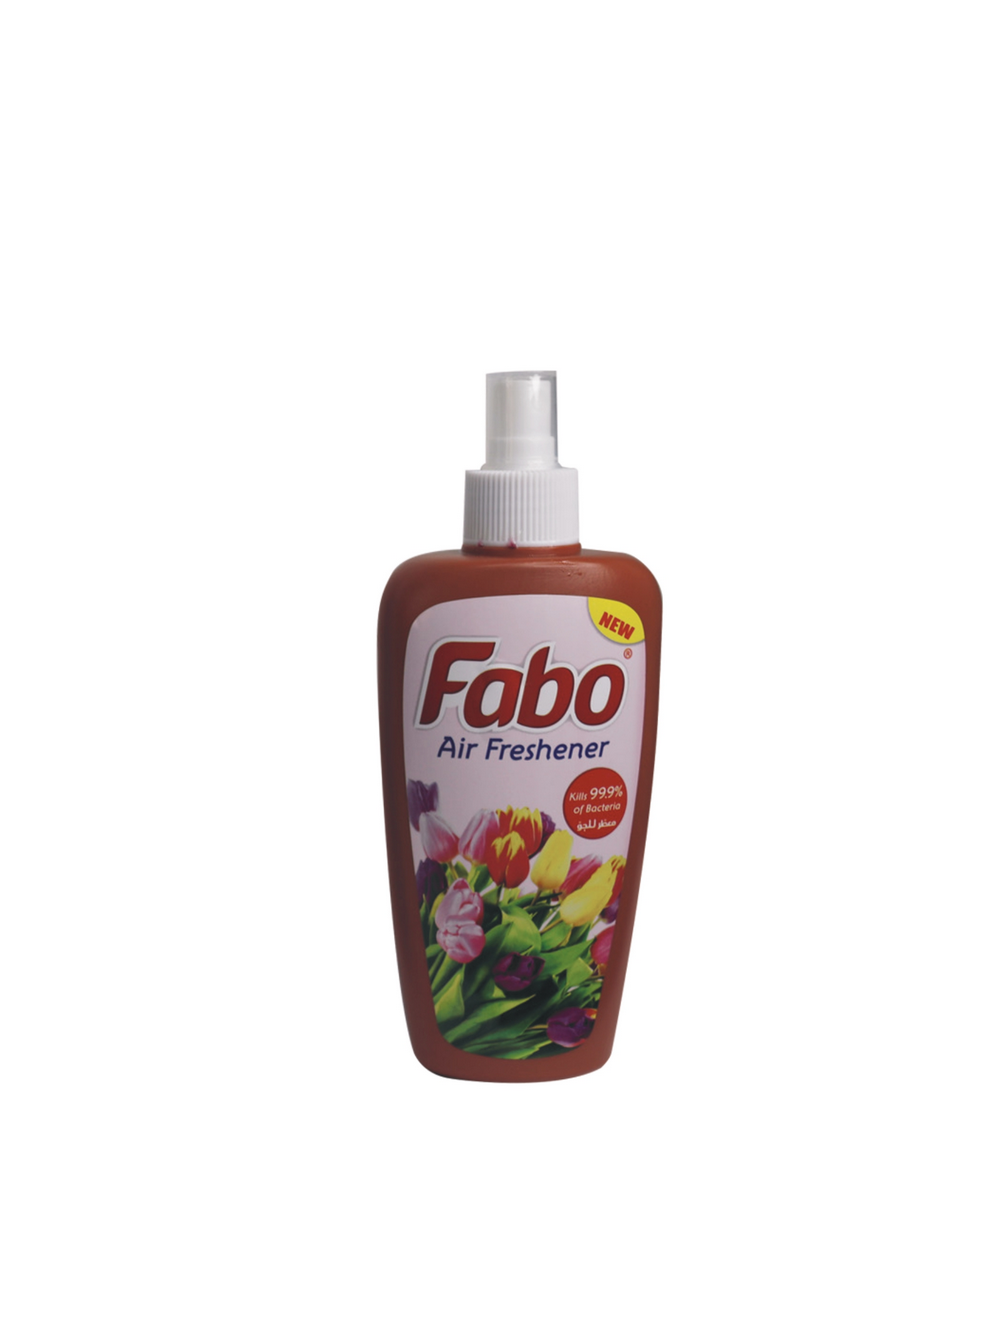 fabo-products_page-0038